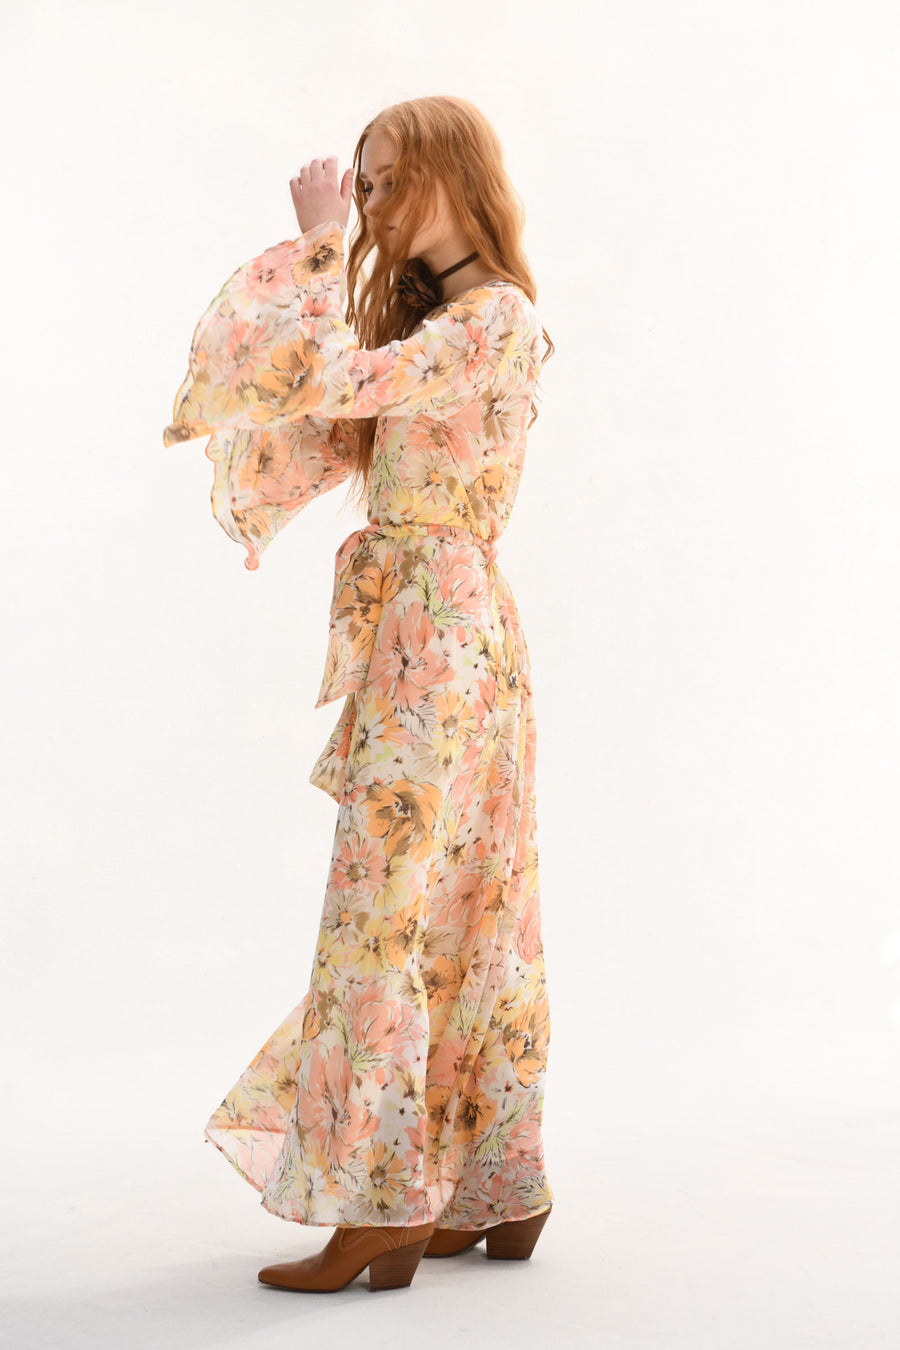 Florence : Pale Peach Yellow Floral “Avery”